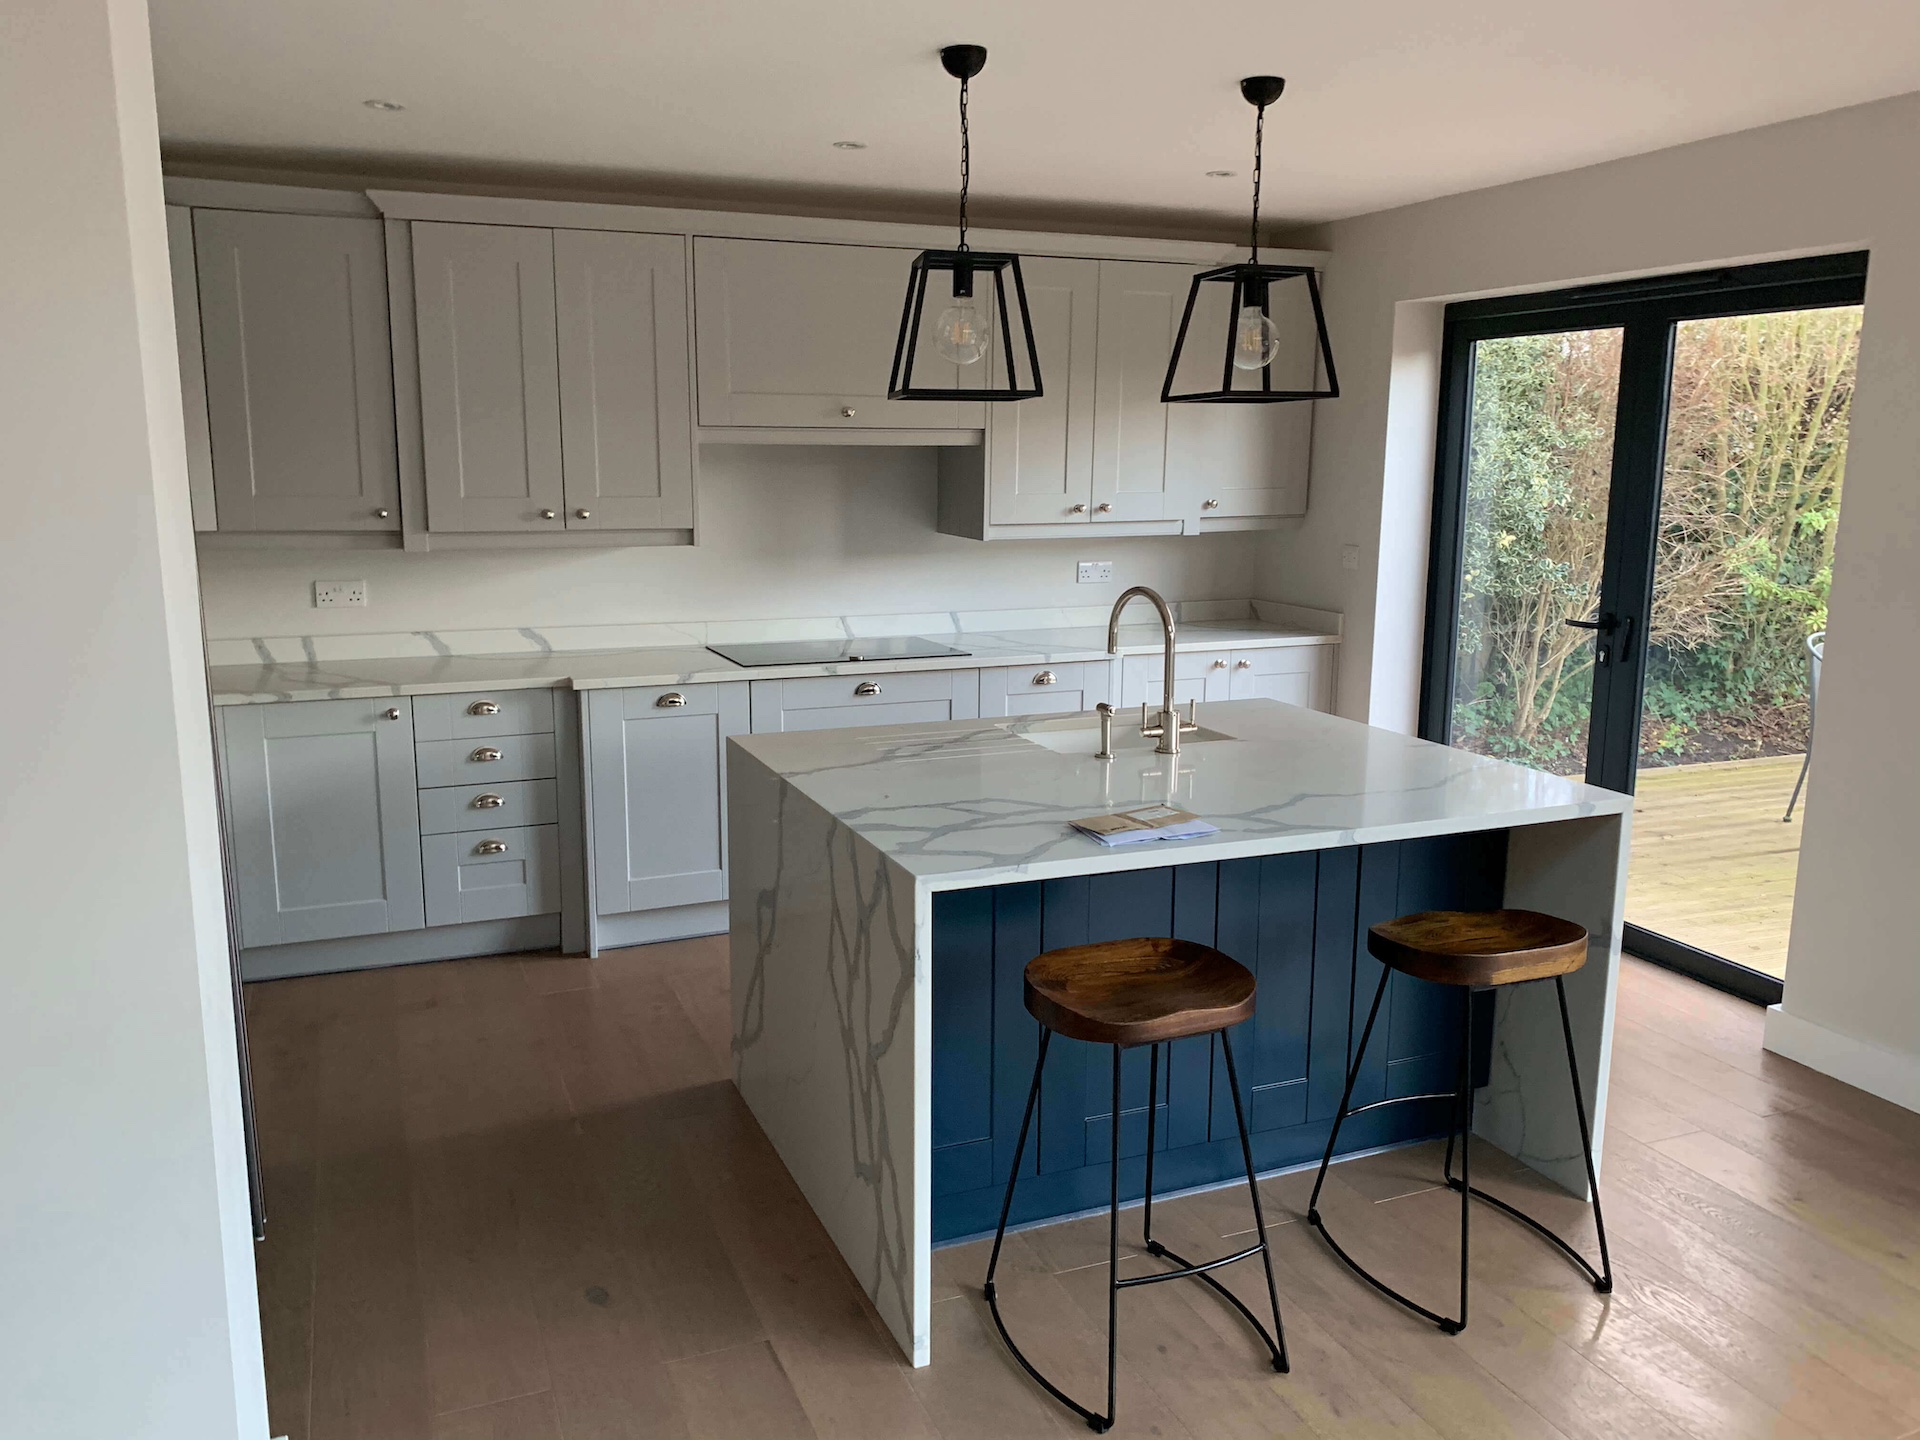 Spotless kitchen in Wandsworth, SW18, after Cleaningsure's end of tenancy cleaning service, highlighting gleaming surfaces, polished appliances, and a meticulously clean floor, ready for new tenants.